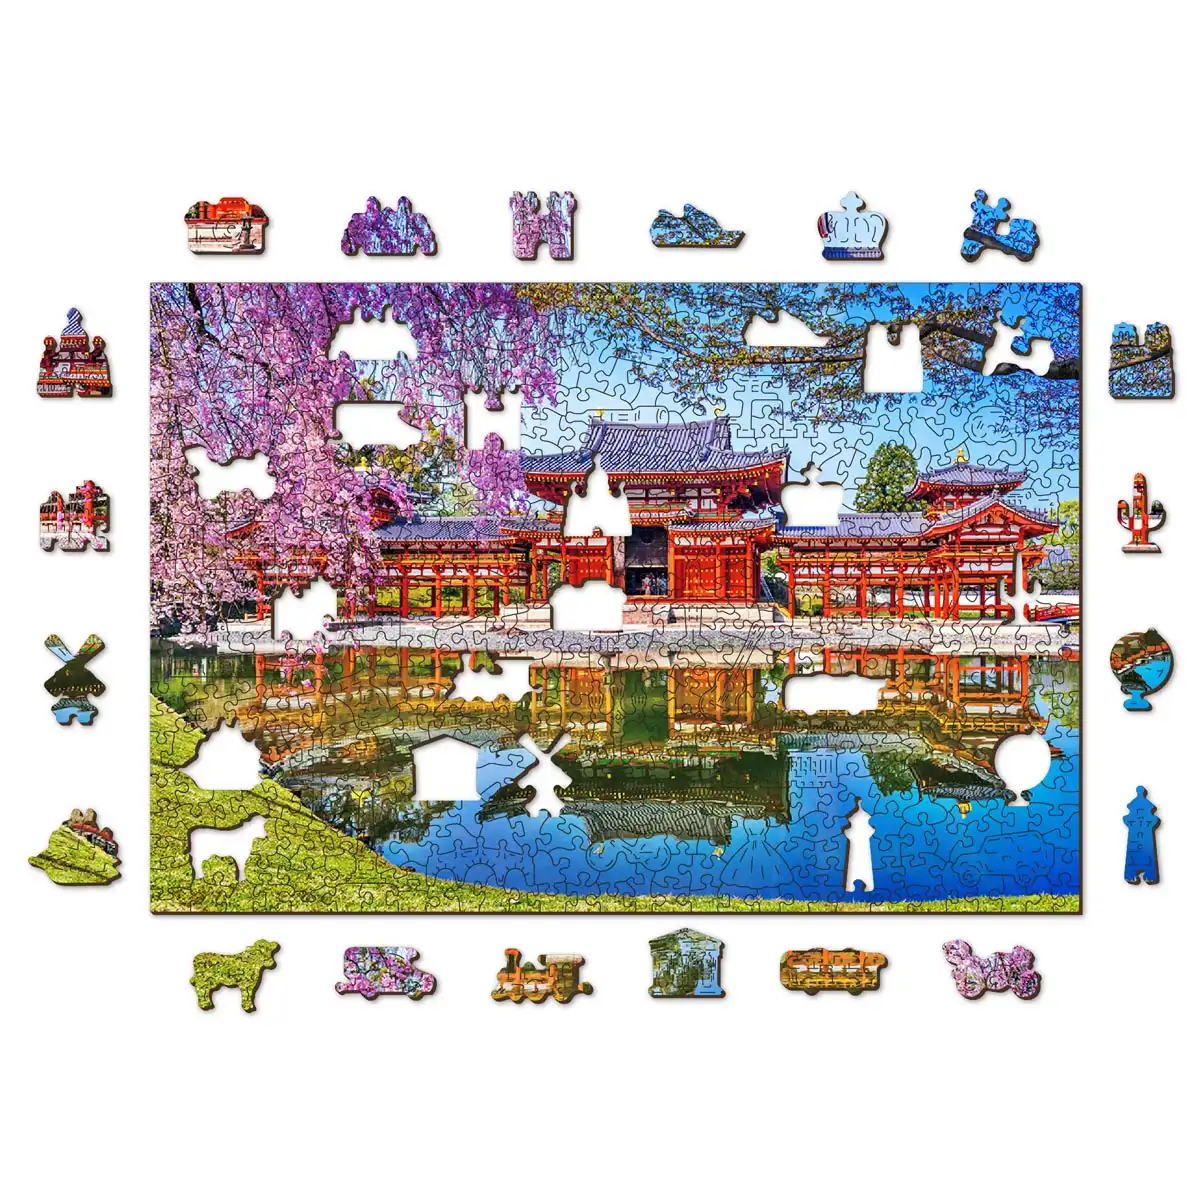 https://wooden.city/wp-content/uploads/2023/09/wooden-jigsaw-puzzle-for-adults-tr-505-0123-l-2-1.webp